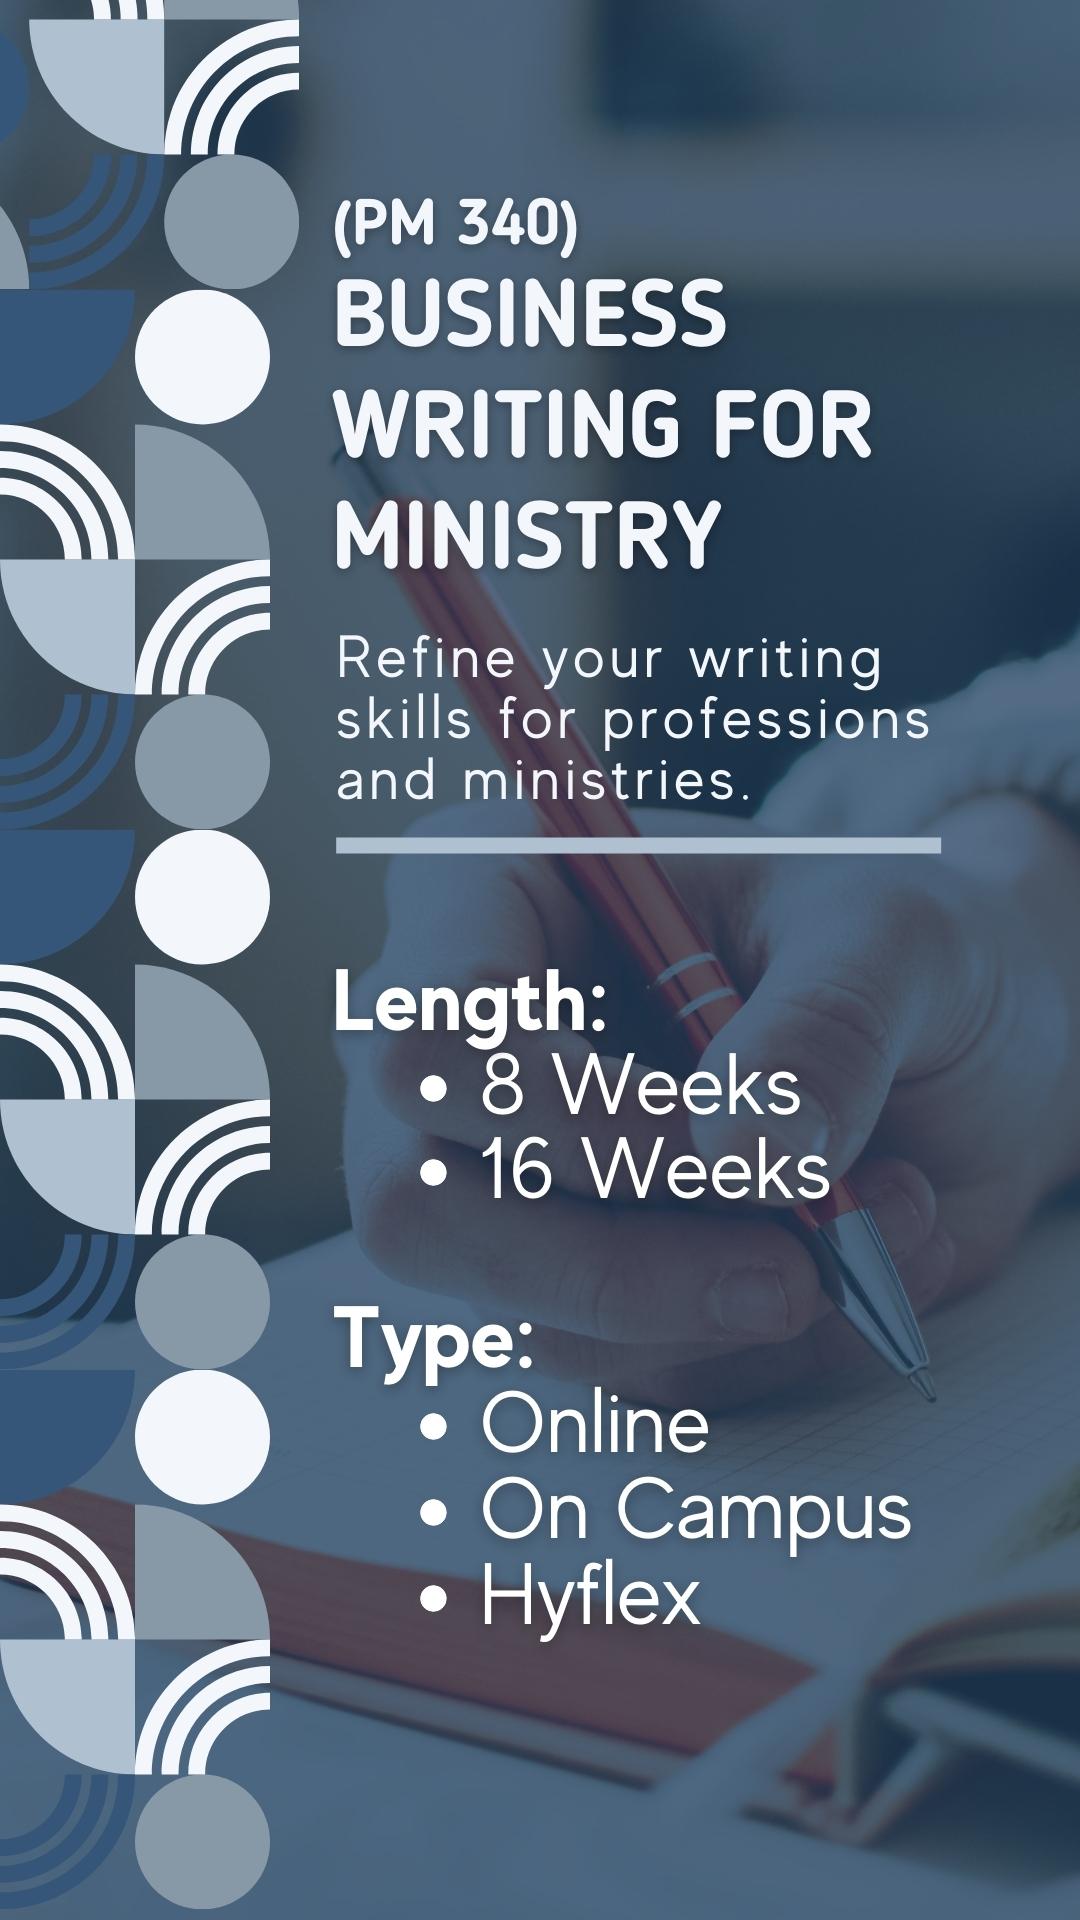 Business Writing for Ministry